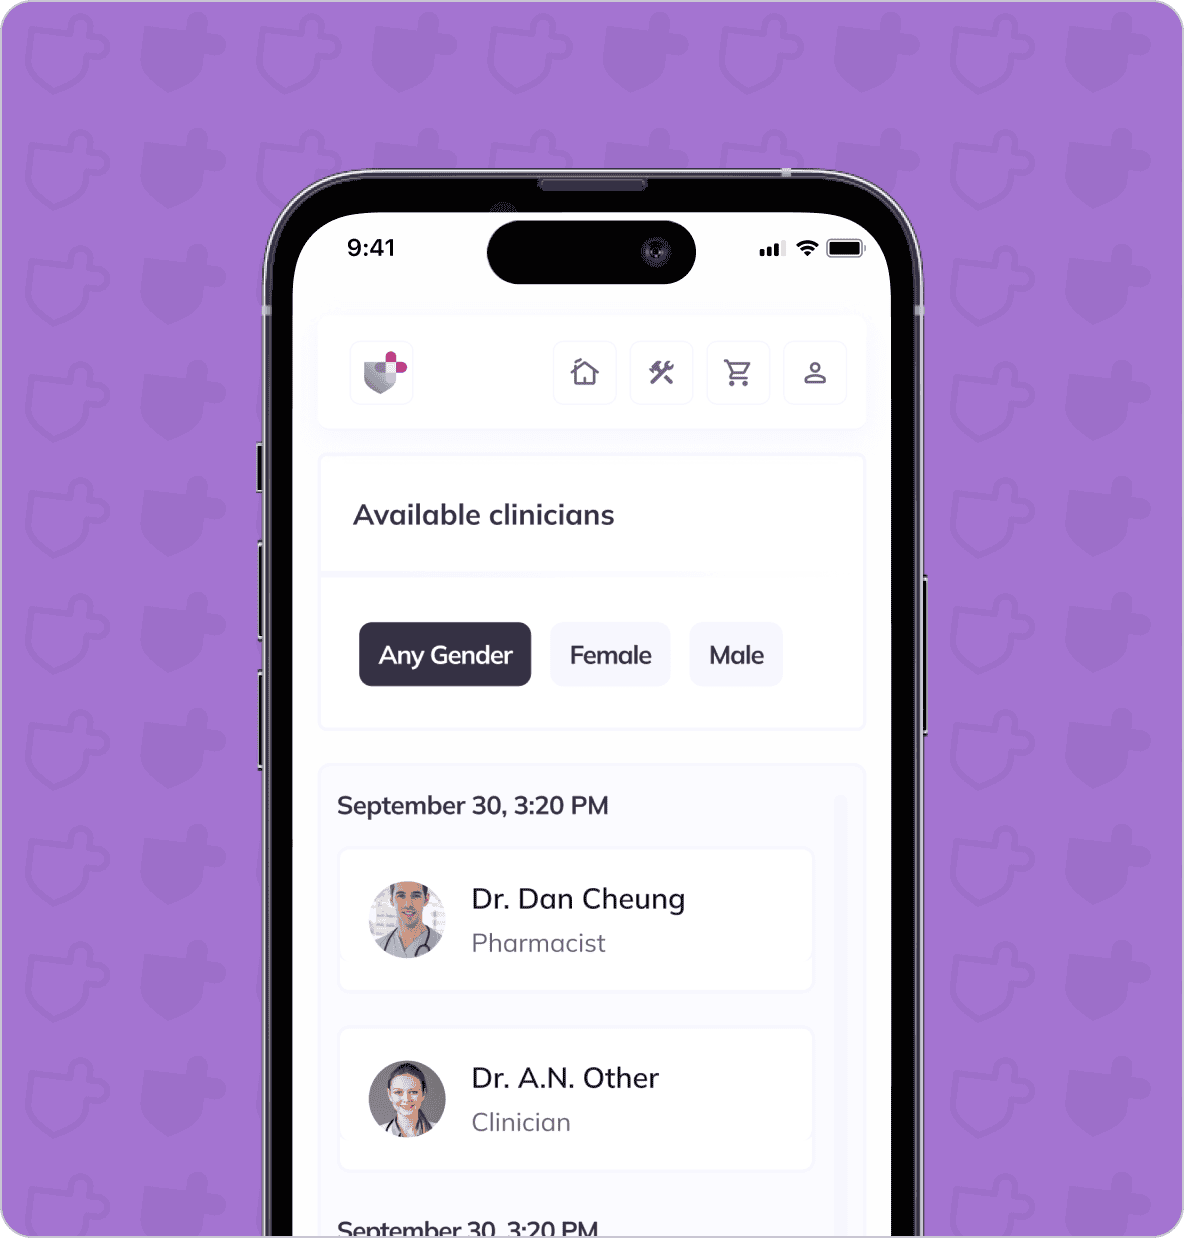 A smartphone screen displays a list of available clinicians, with options to filter by gender. Two clinicians are shown: Dr. Dan Cheung, Pharmacist, and Dr. A. N. Other, Clinician. The background is purple.